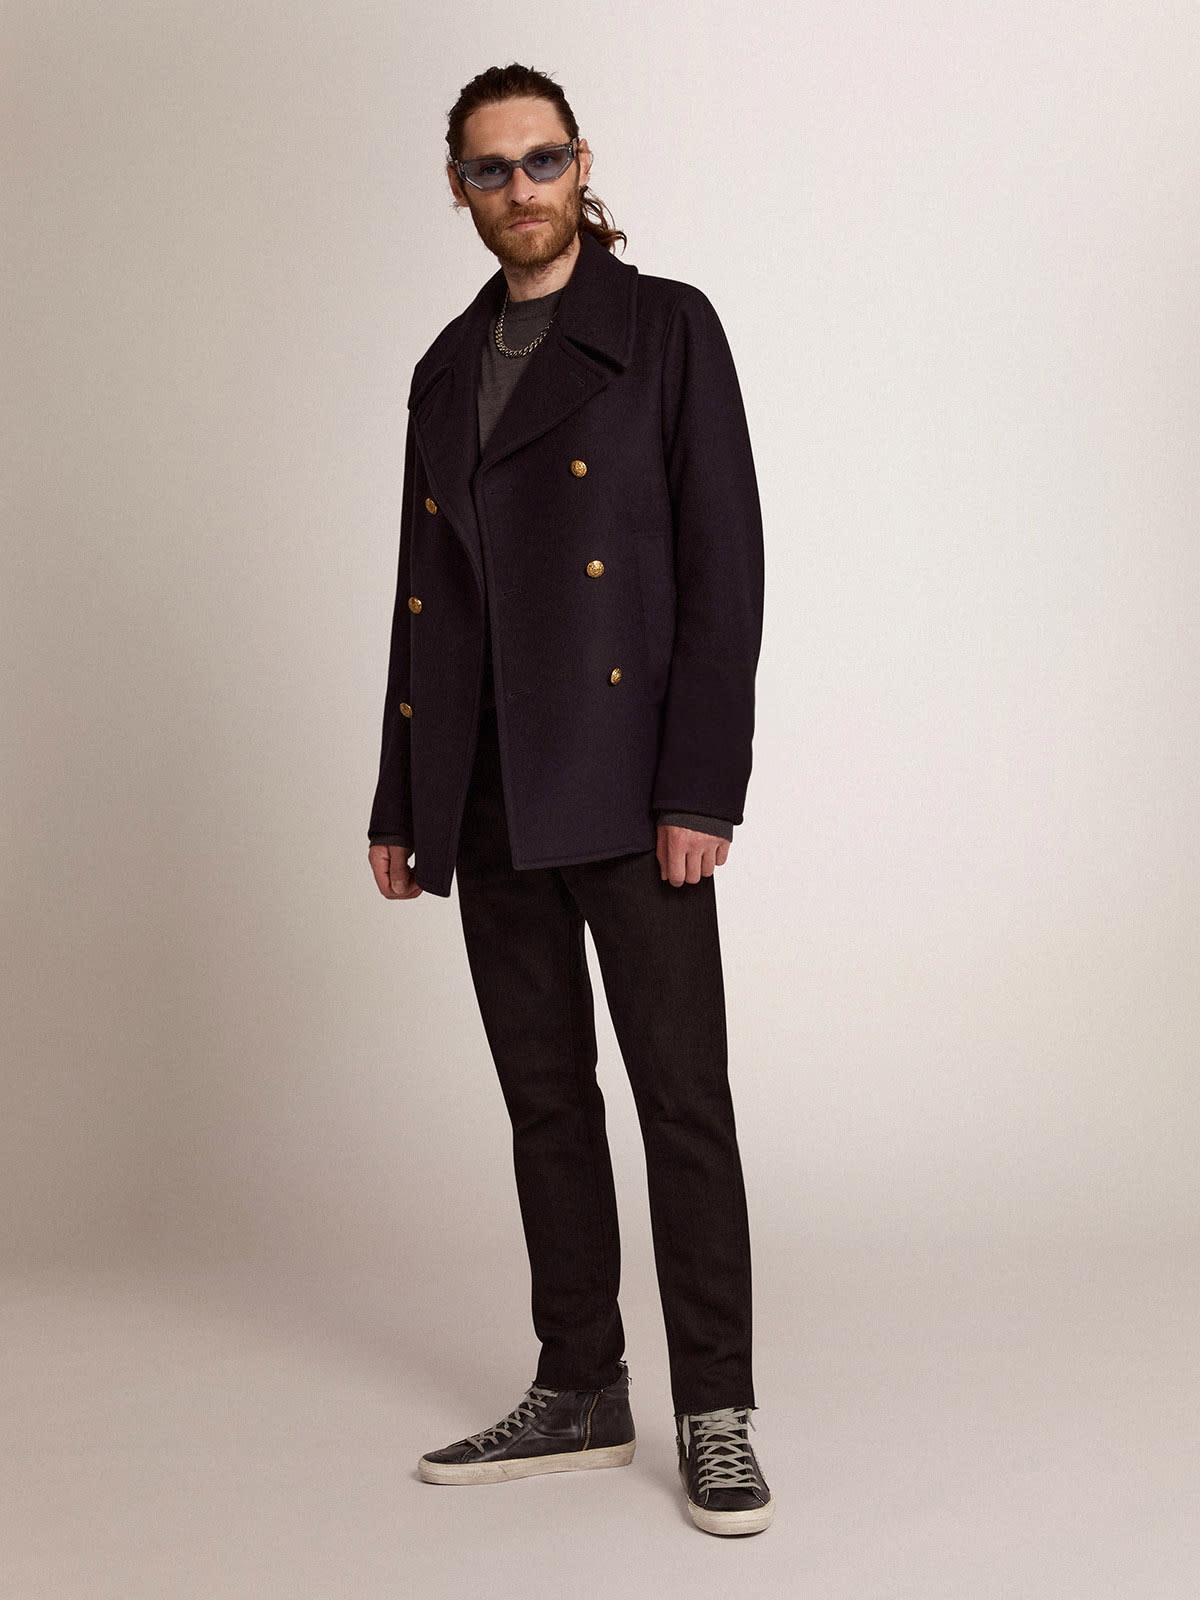 Men's double-breasted coat in dark blue wool with gold buttons - 3